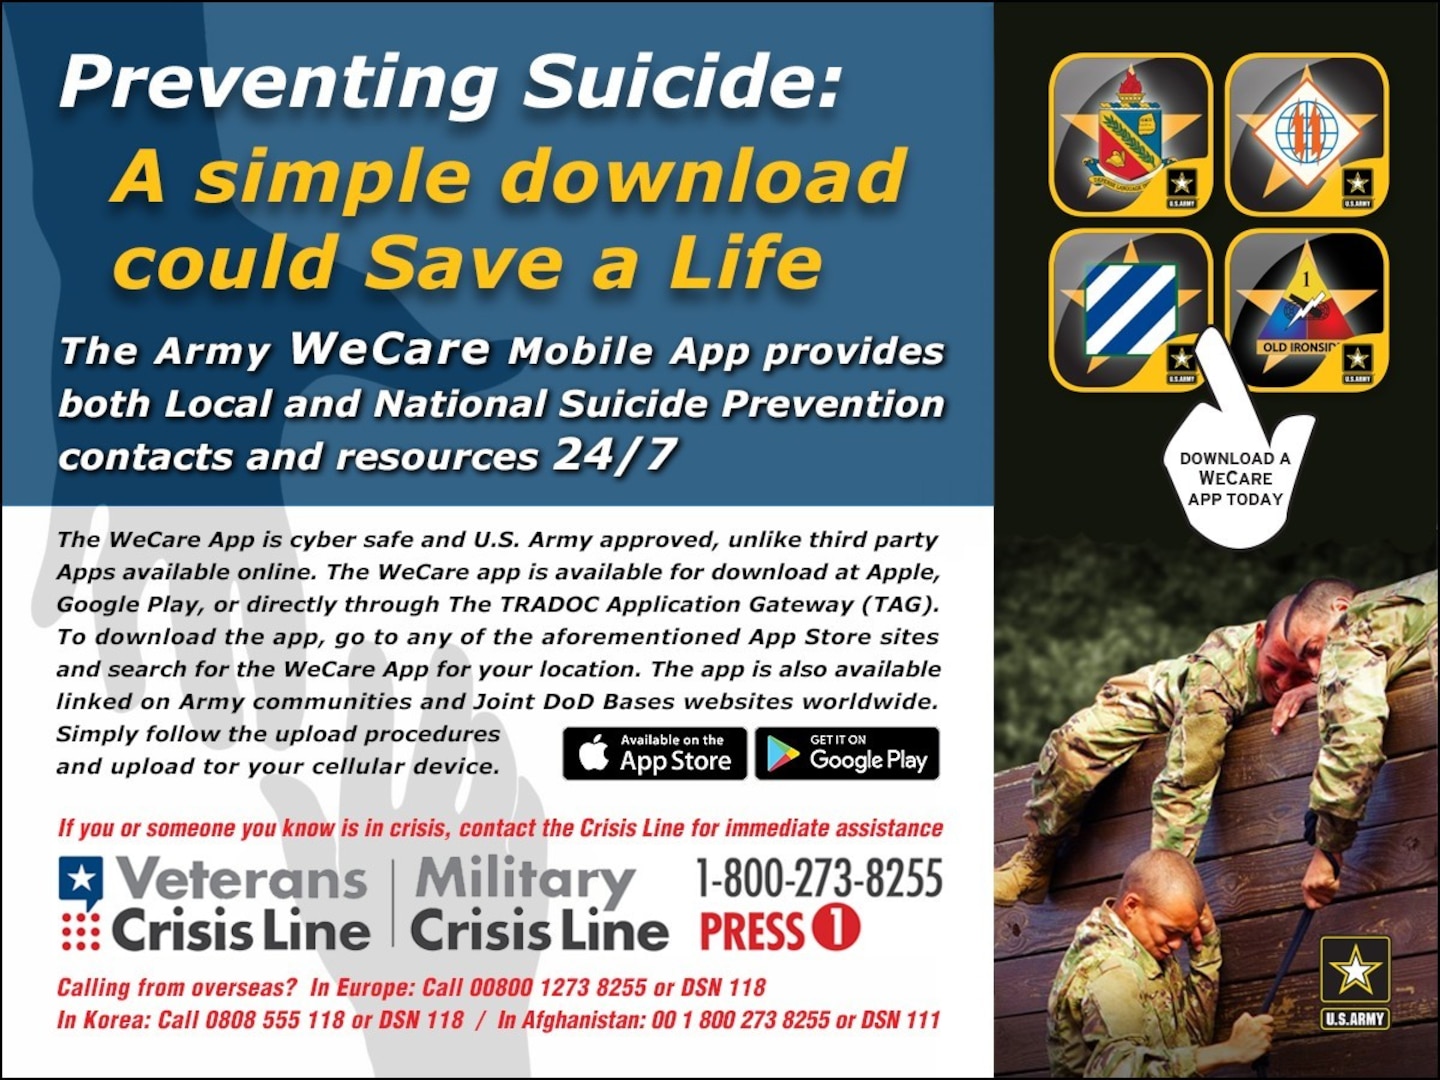 Graphic - Find the full suite of TRADOC WeCare Apps on the Apple App Store for IOS, the Google Play Store for Android, or at the TRADOC App Gateway at: https://public.tag.army.mil/catalog/tag/home.